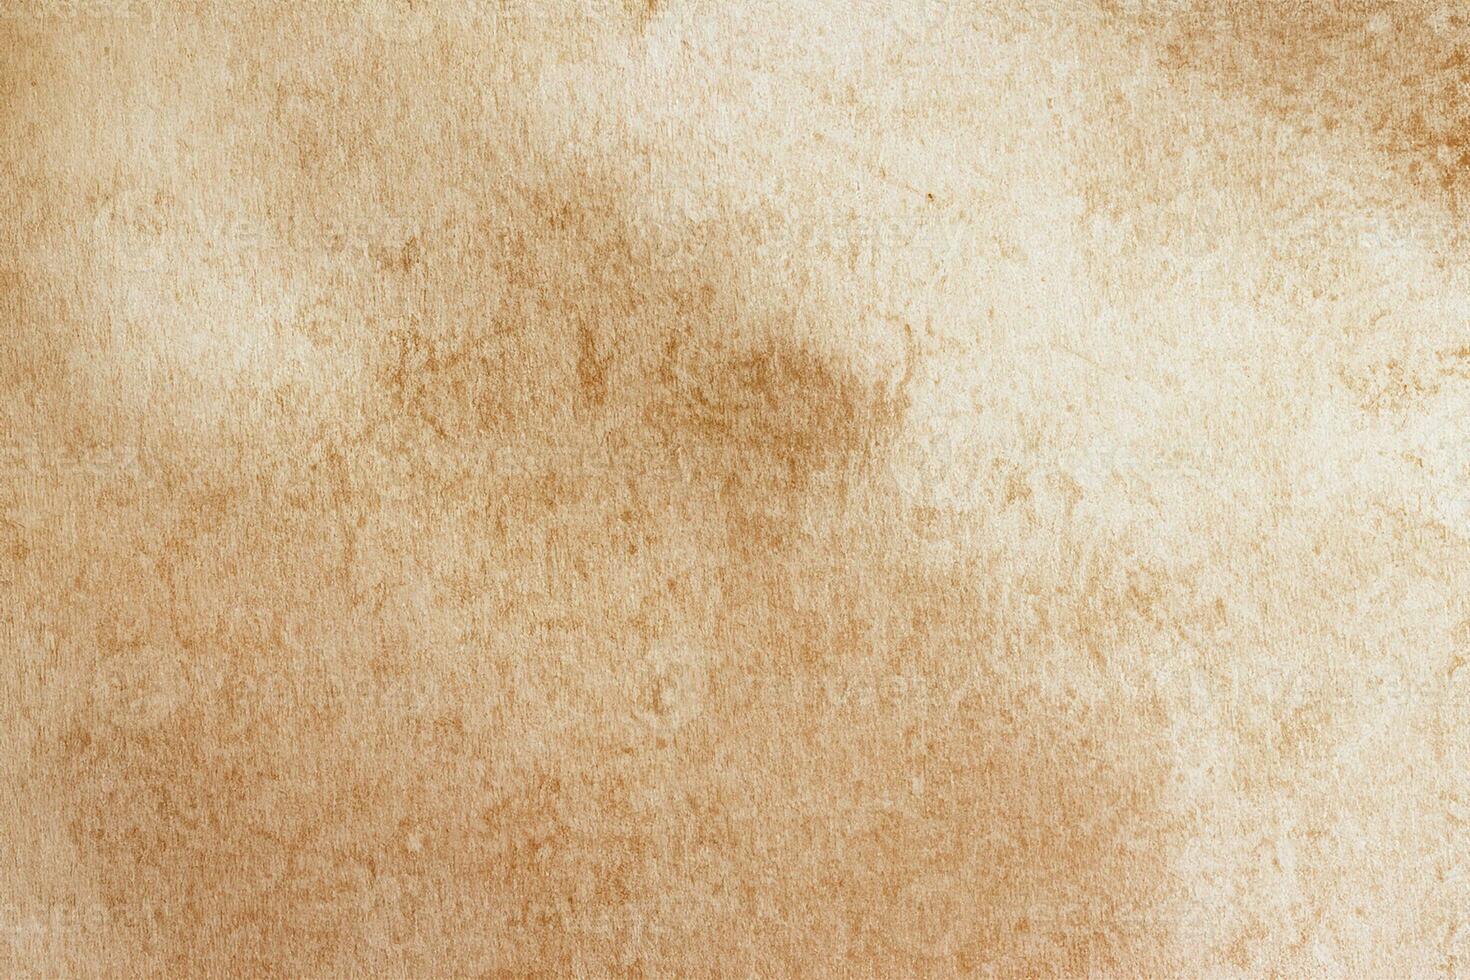 Old paper texture for background. vintage paper background or texture, old brown paper texture background. photo